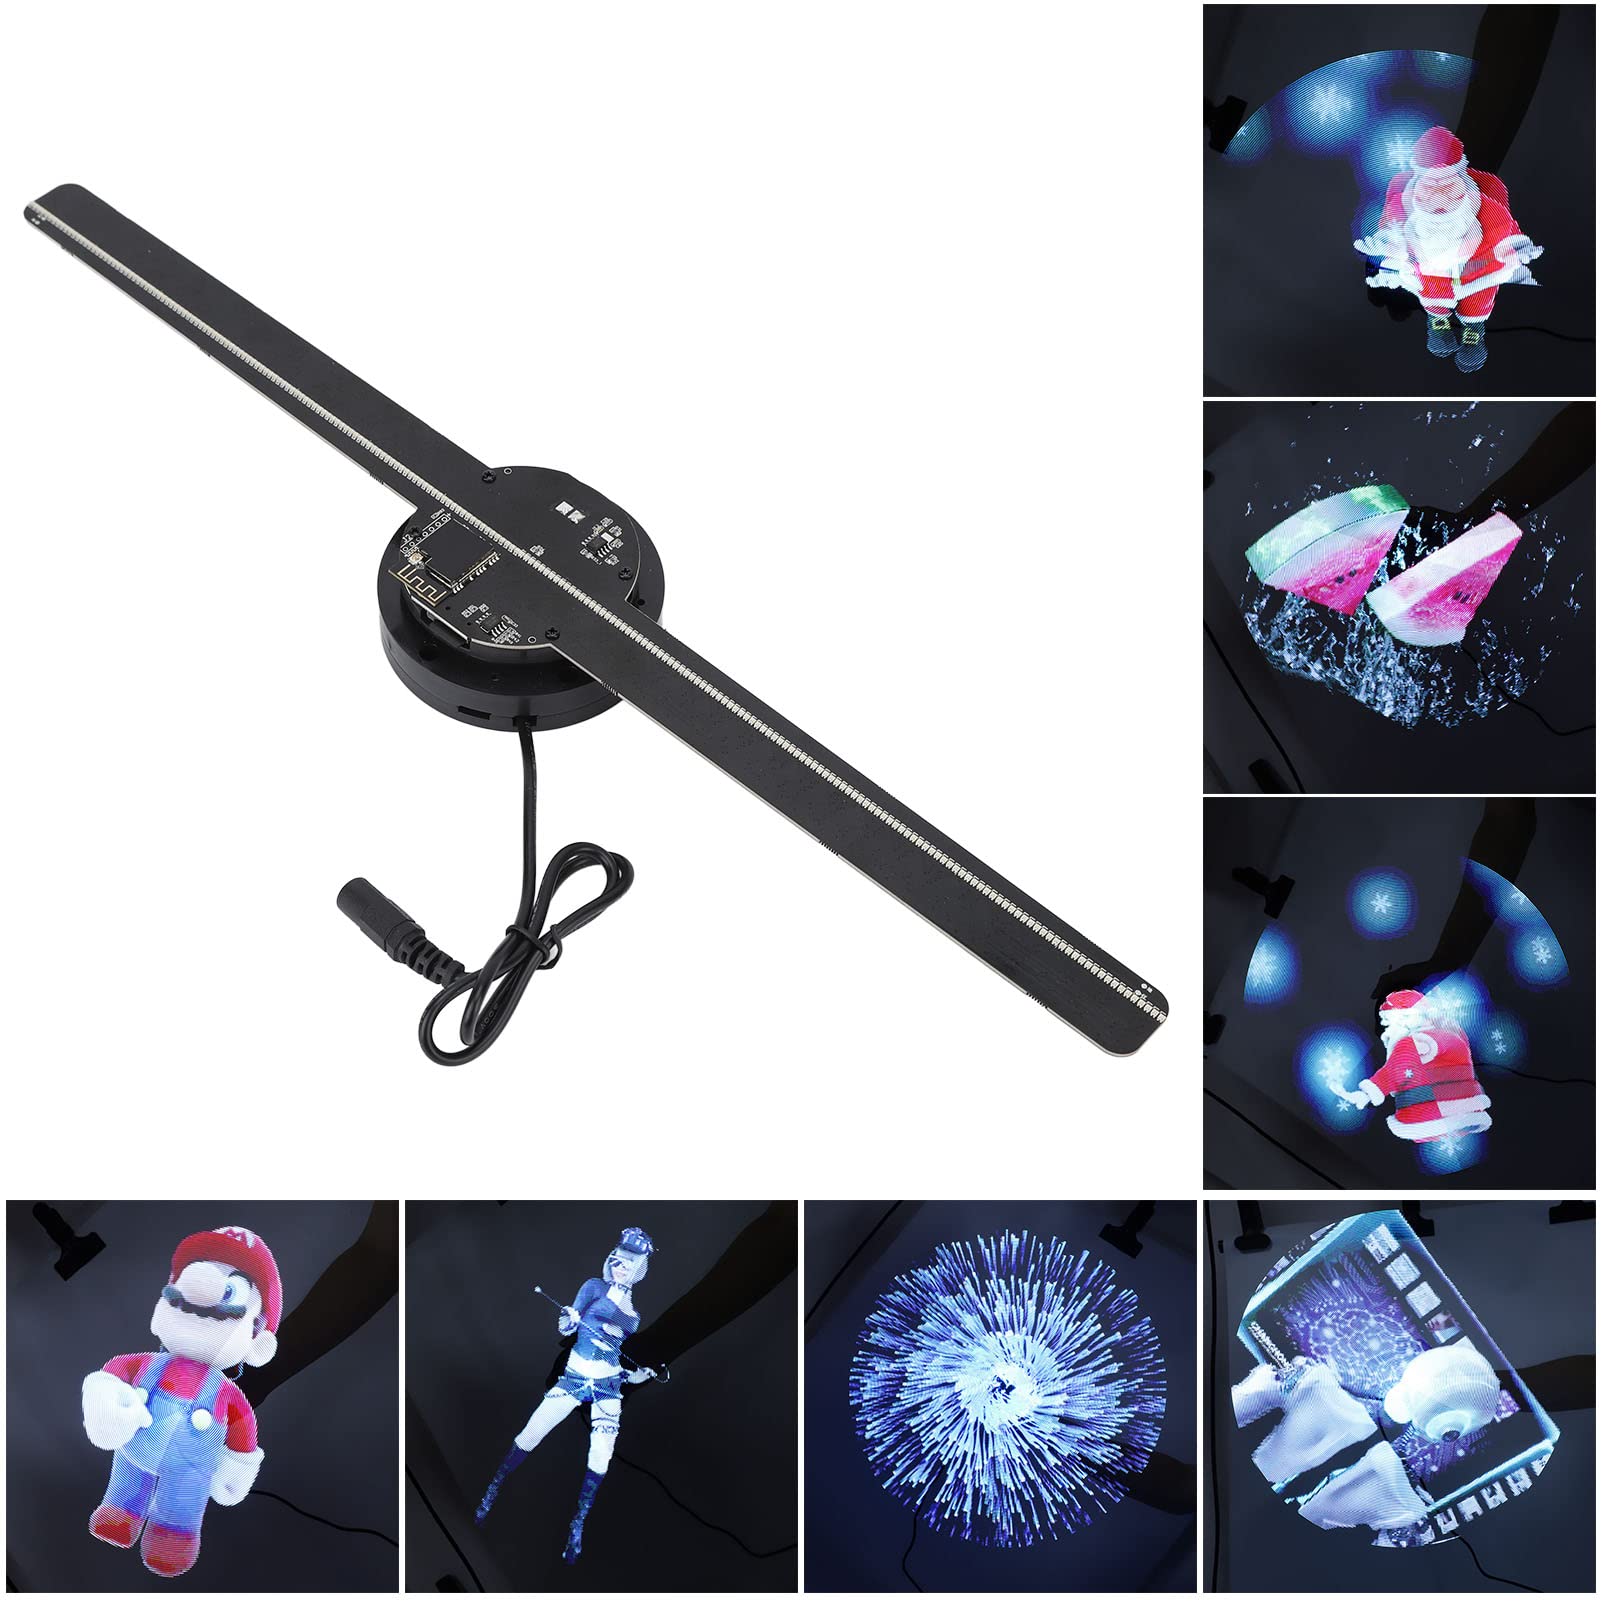 3D Hologram Fan, 42cm High Resolution 3D Advertising Player, 224 HD LED Beads Support WiFi/APP Built in 16GB TF Card, Naked Eye 3D display for Commercial, Shop, Holiday, Party(#1)